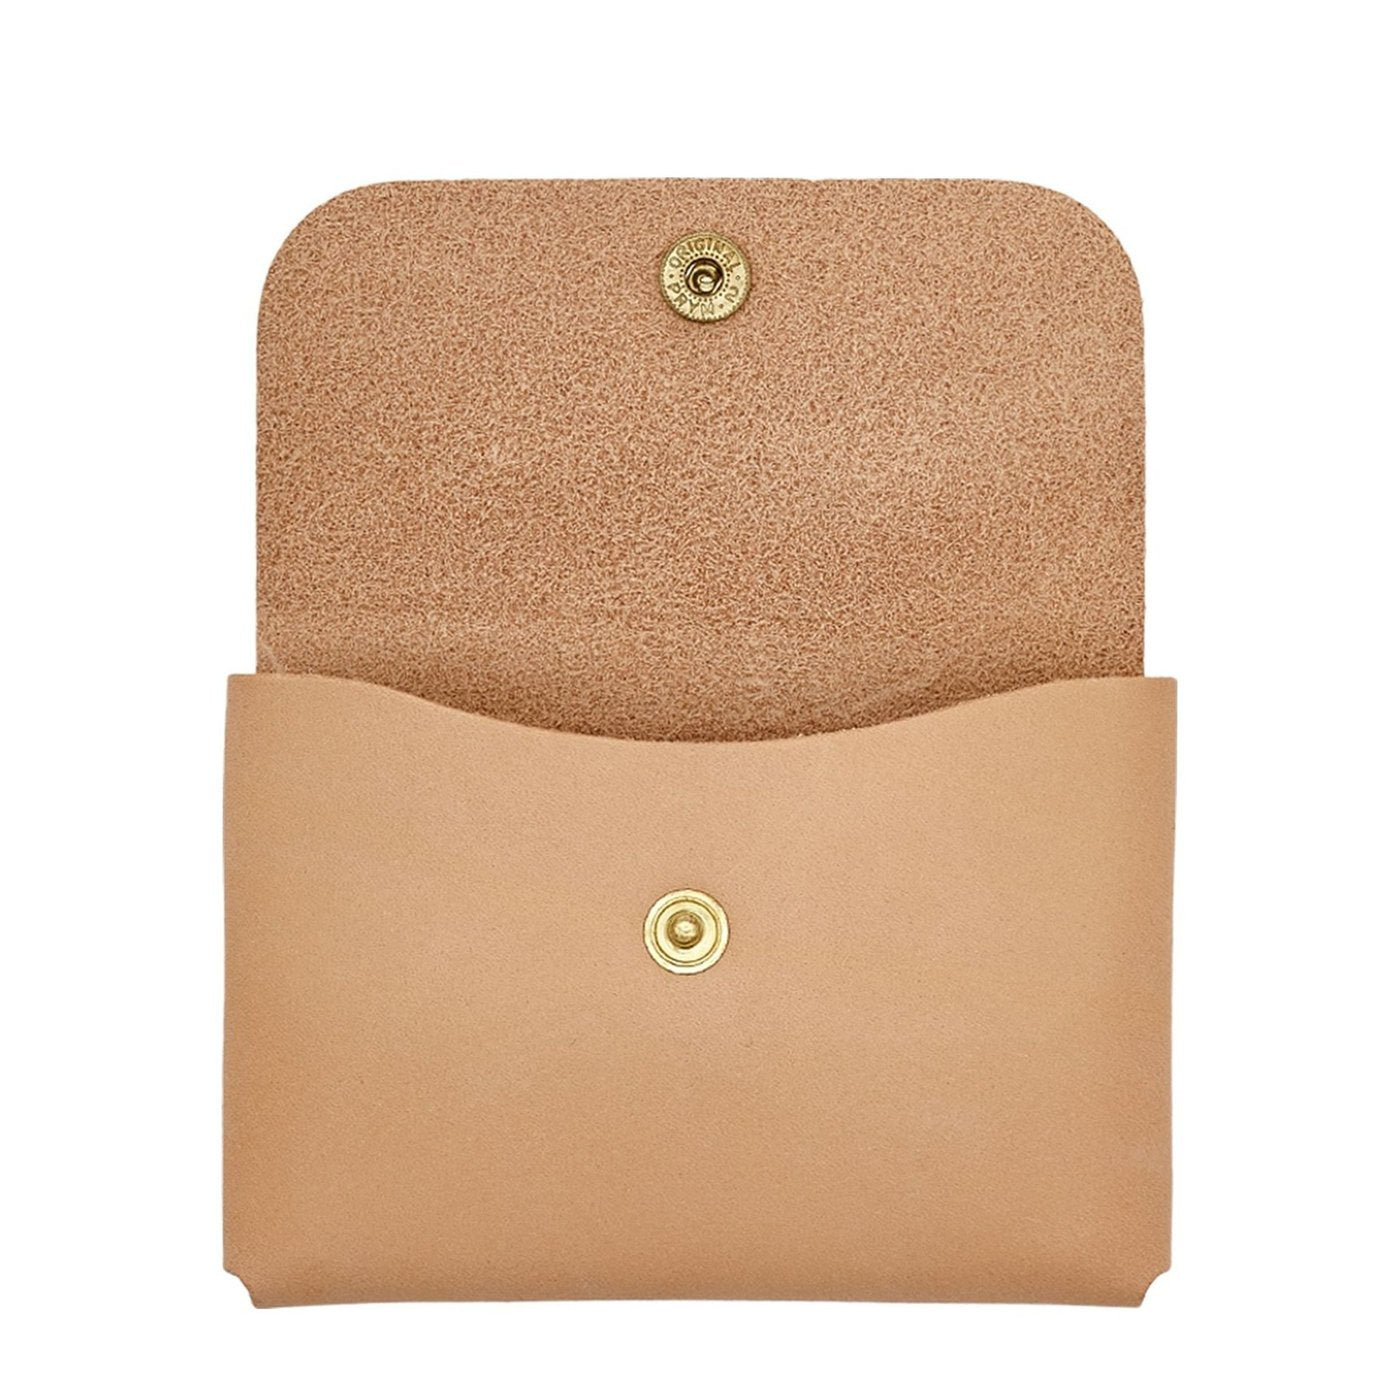 Card case in leather color natural